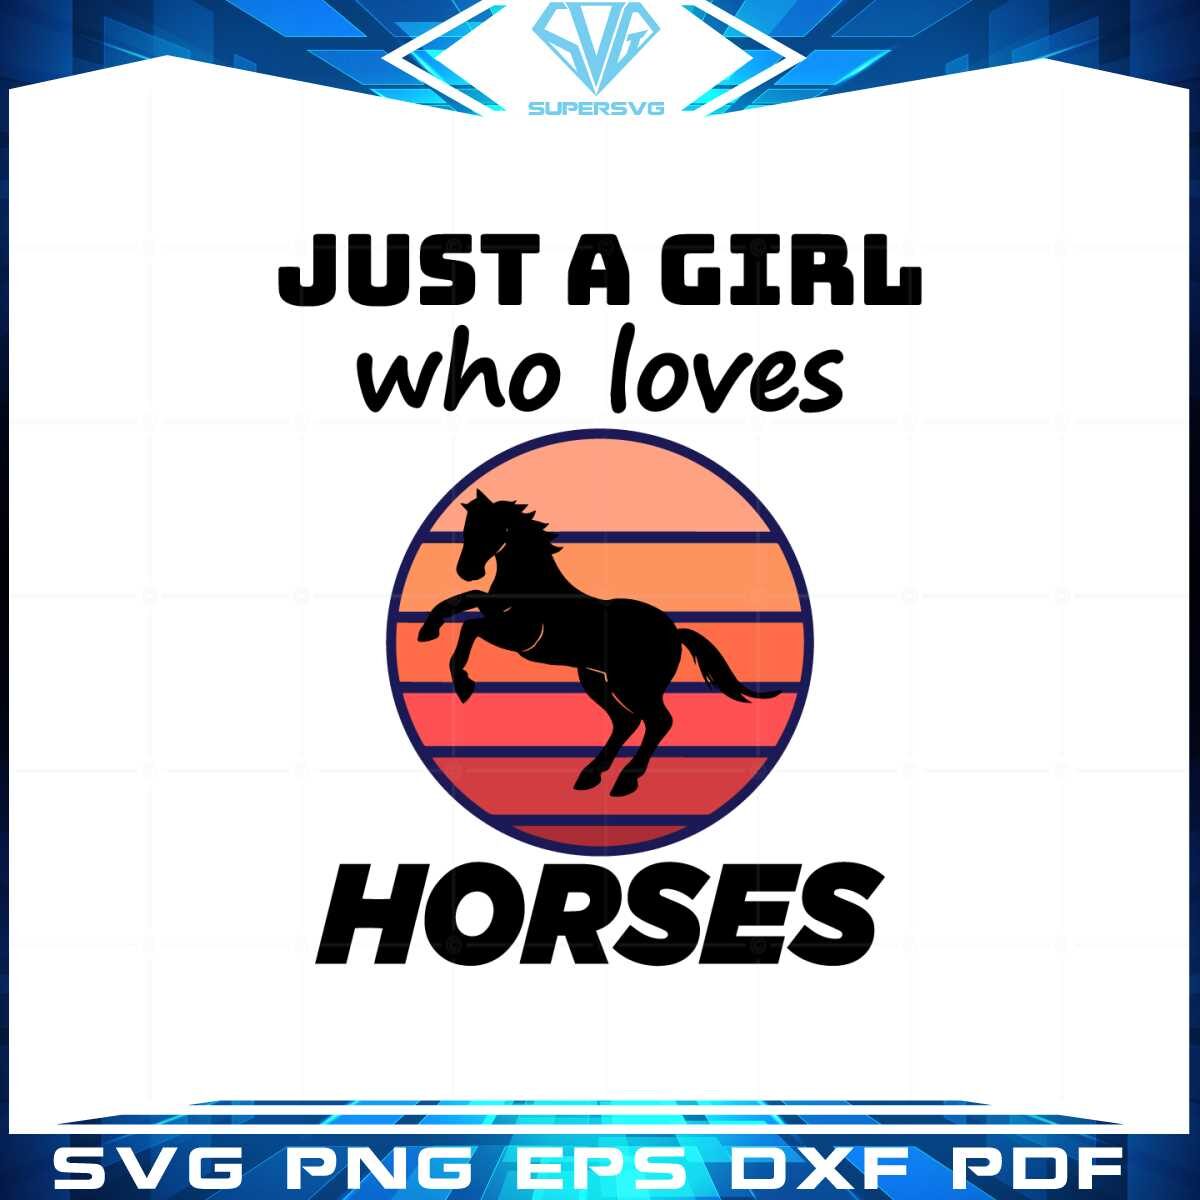 just-a-girl-who-loves-horses-vintage-svg-graphic-designs-files